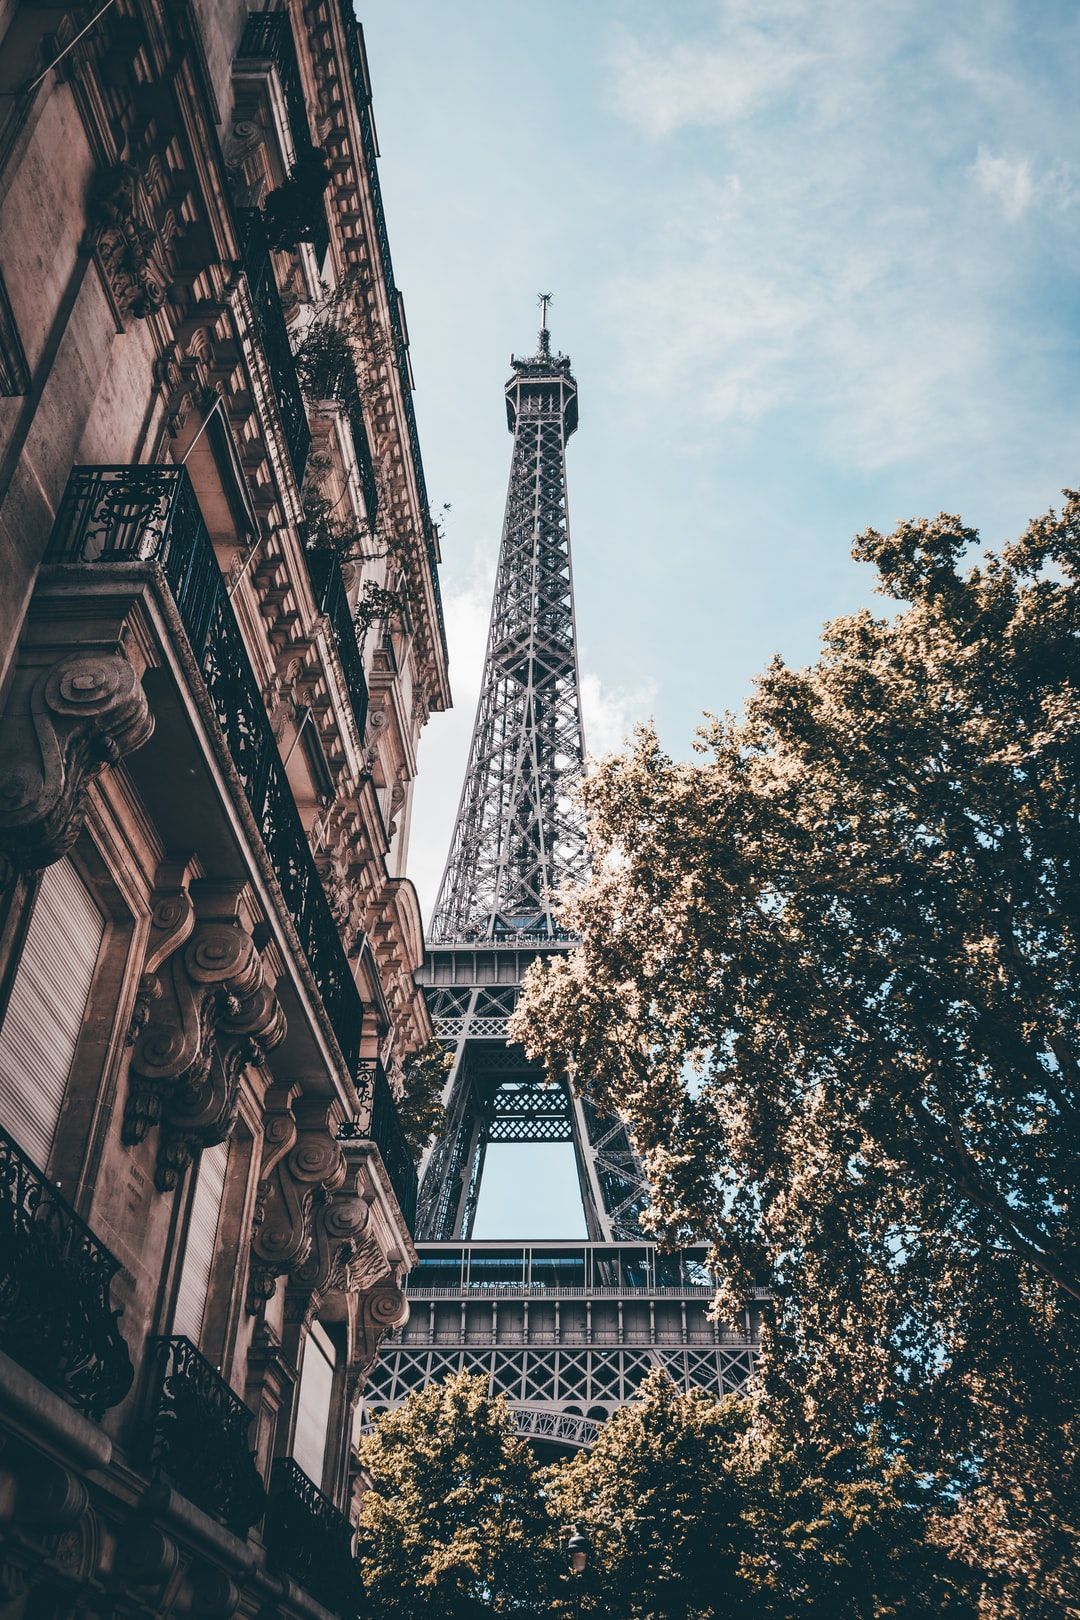 The eiffel tower is seen from a building - Eiffel Tower